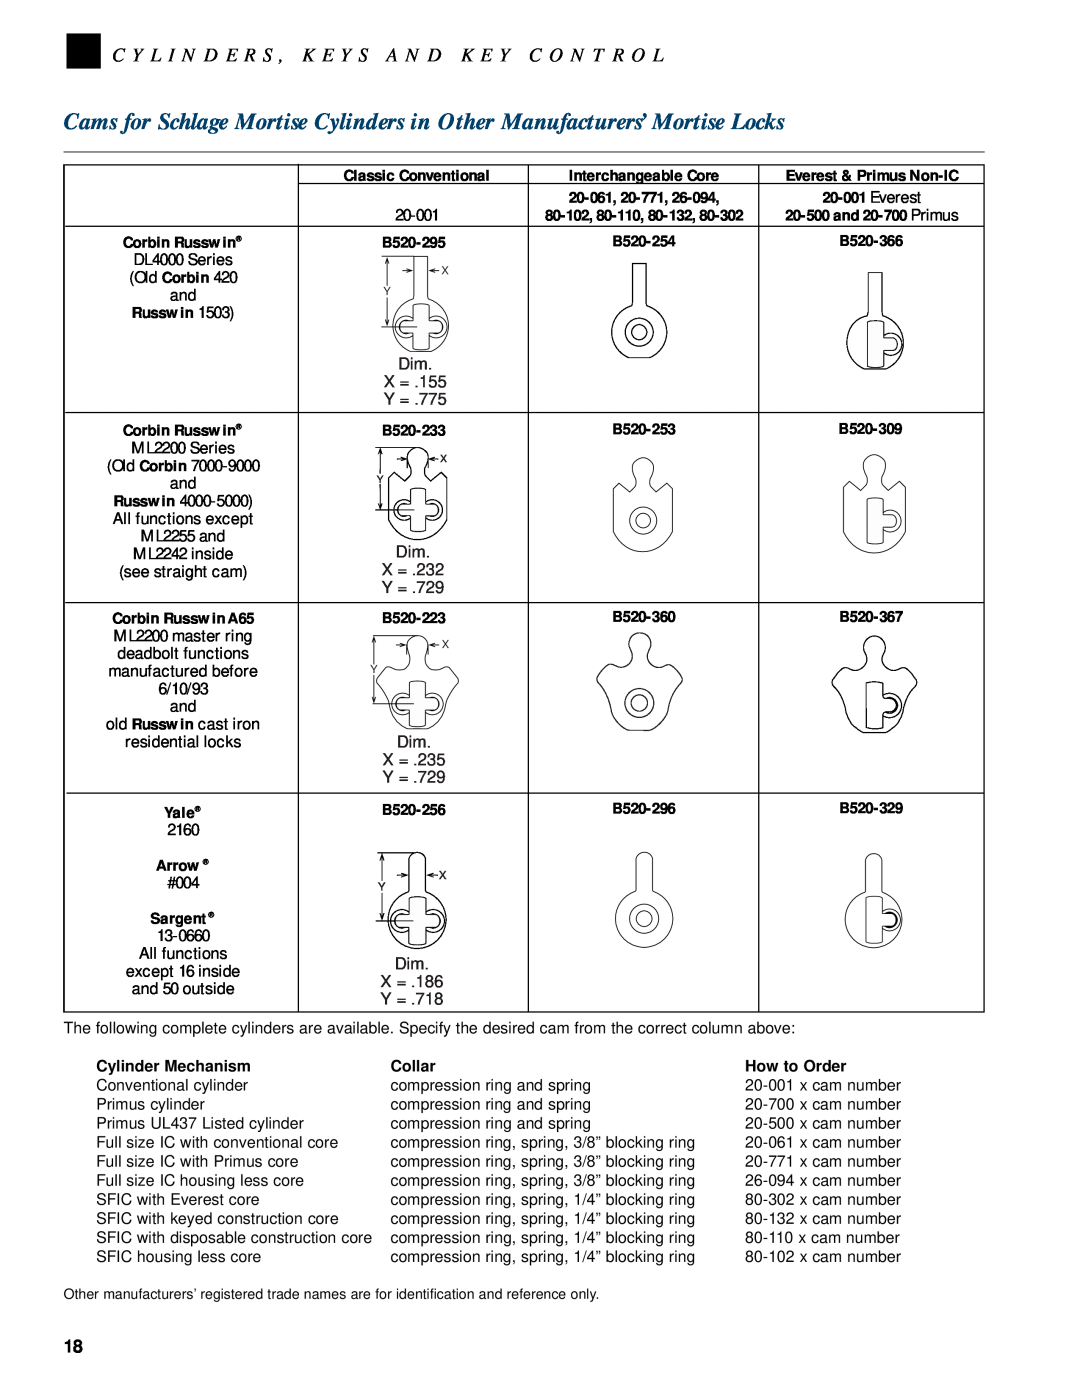 Schlage CYLINDERS manual Interchangeable Core, 20-061, All functions except, Yale, Cylinder Mechanism, Collar, How to Order 